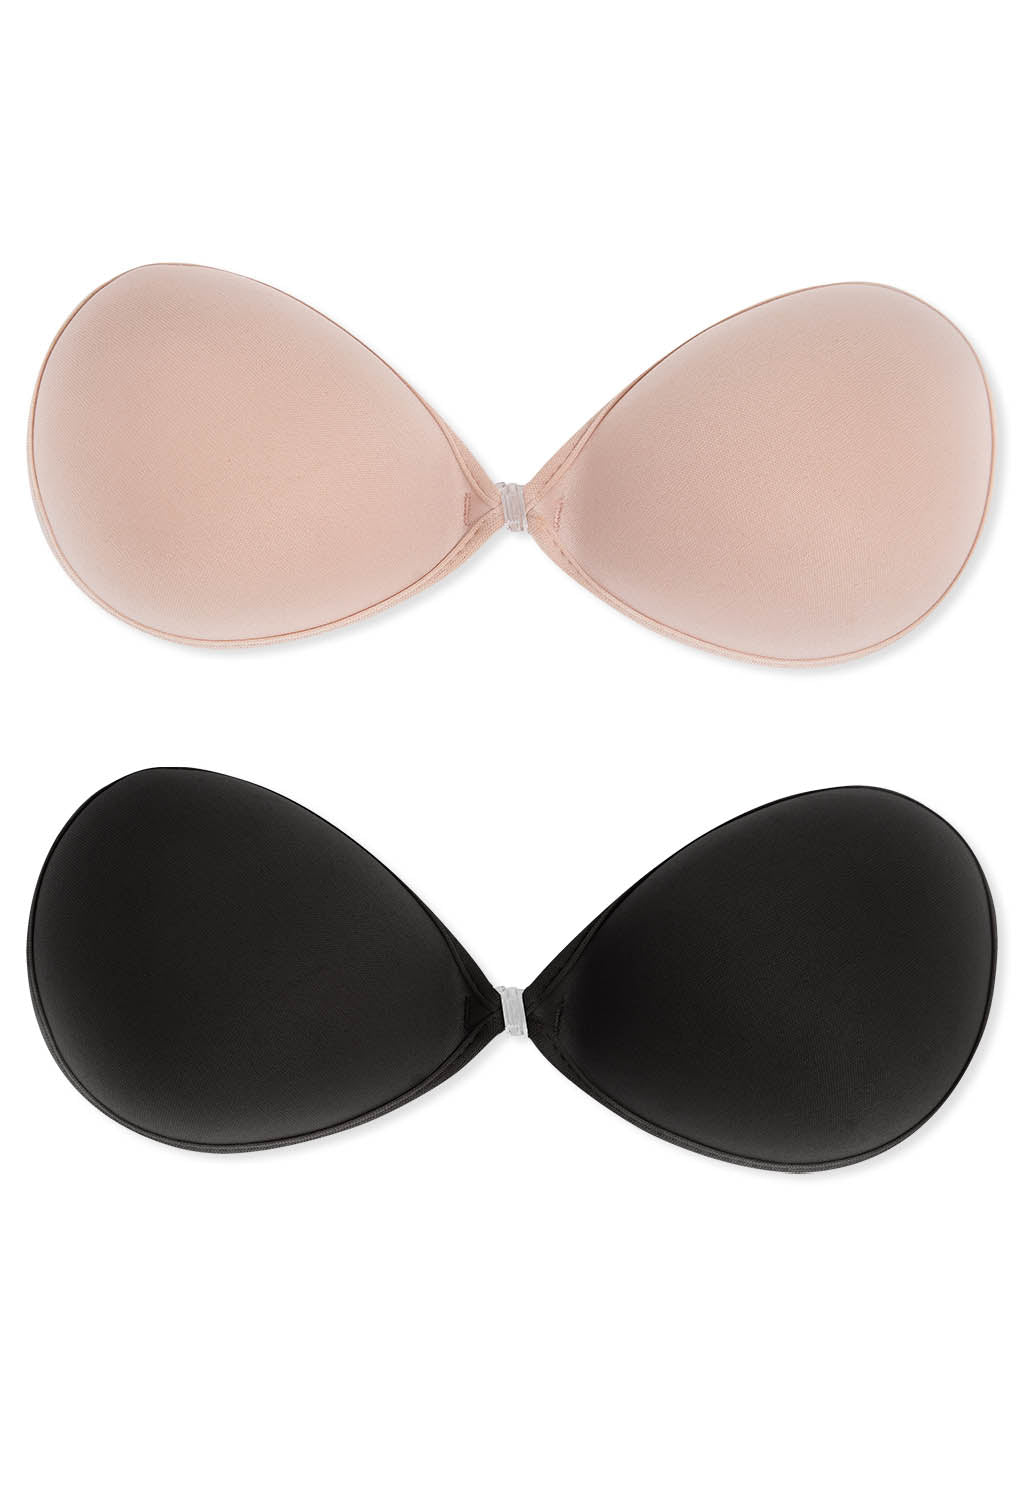 Wholesale snapped bra For Supportive Underwear 